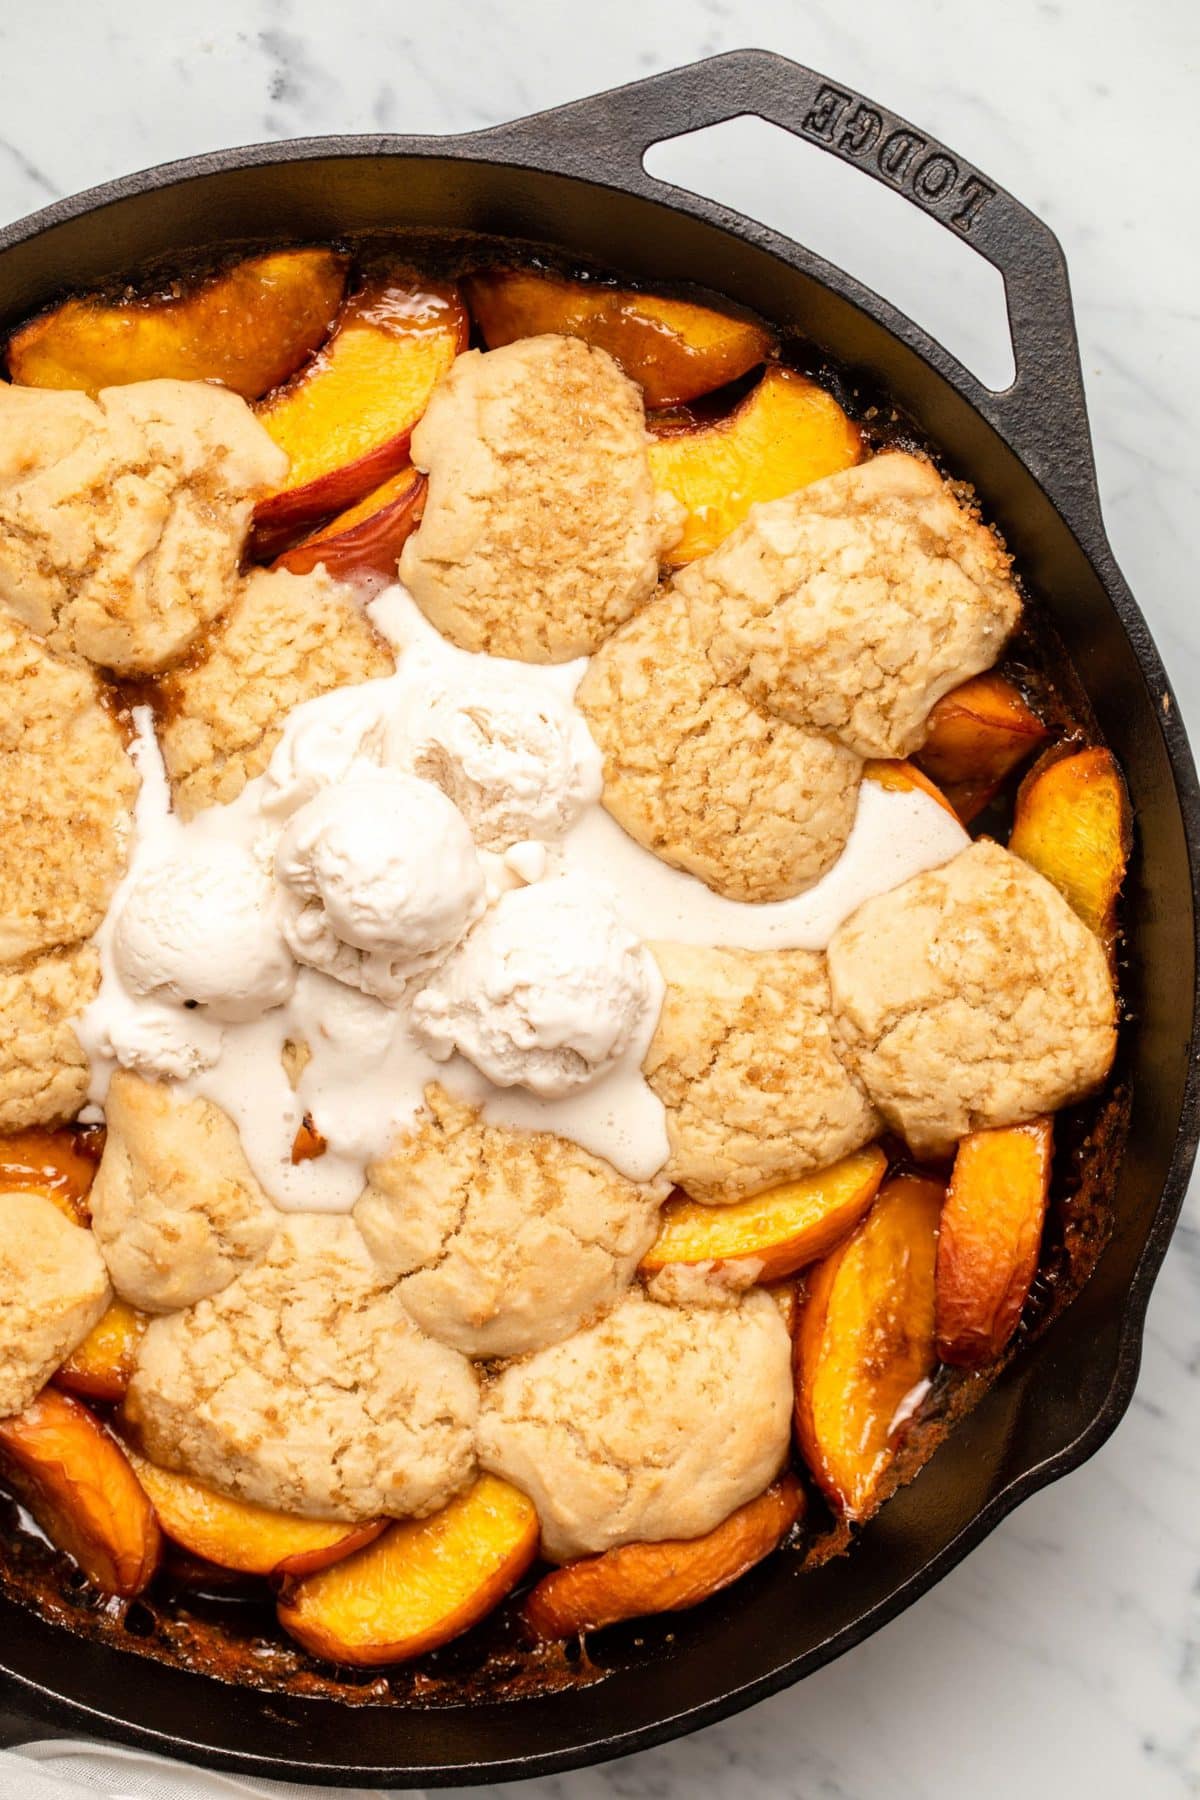 Grilled peach cobbler in cast iron skillet, topped with scoops of melting vanilla ice cream